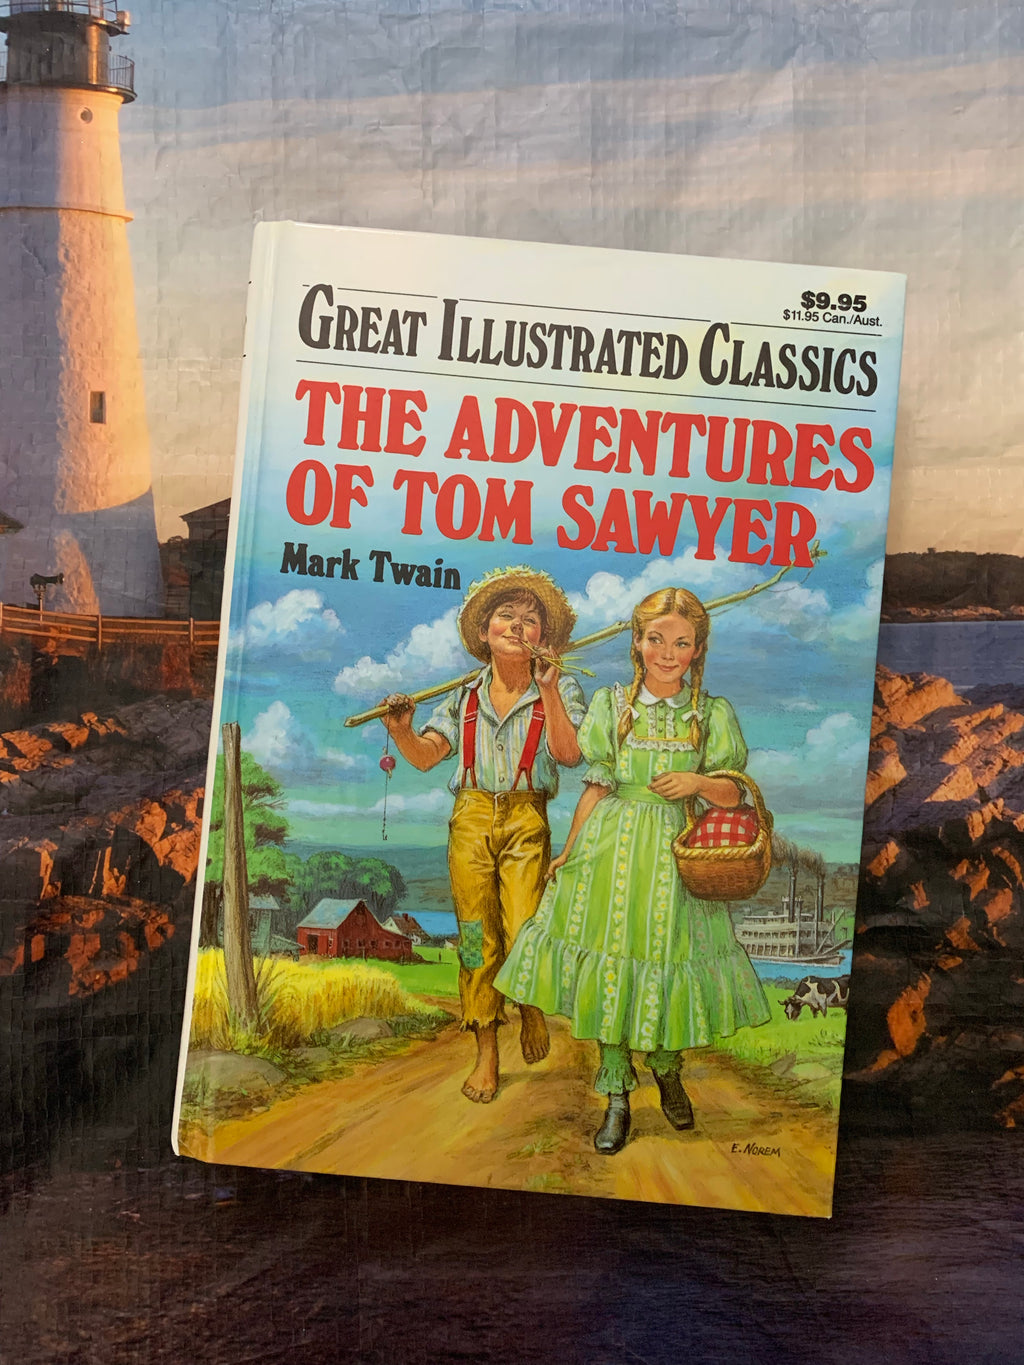 Great Illustrated Classics: The Adventures of Tom Sawyer- By Mark Twain